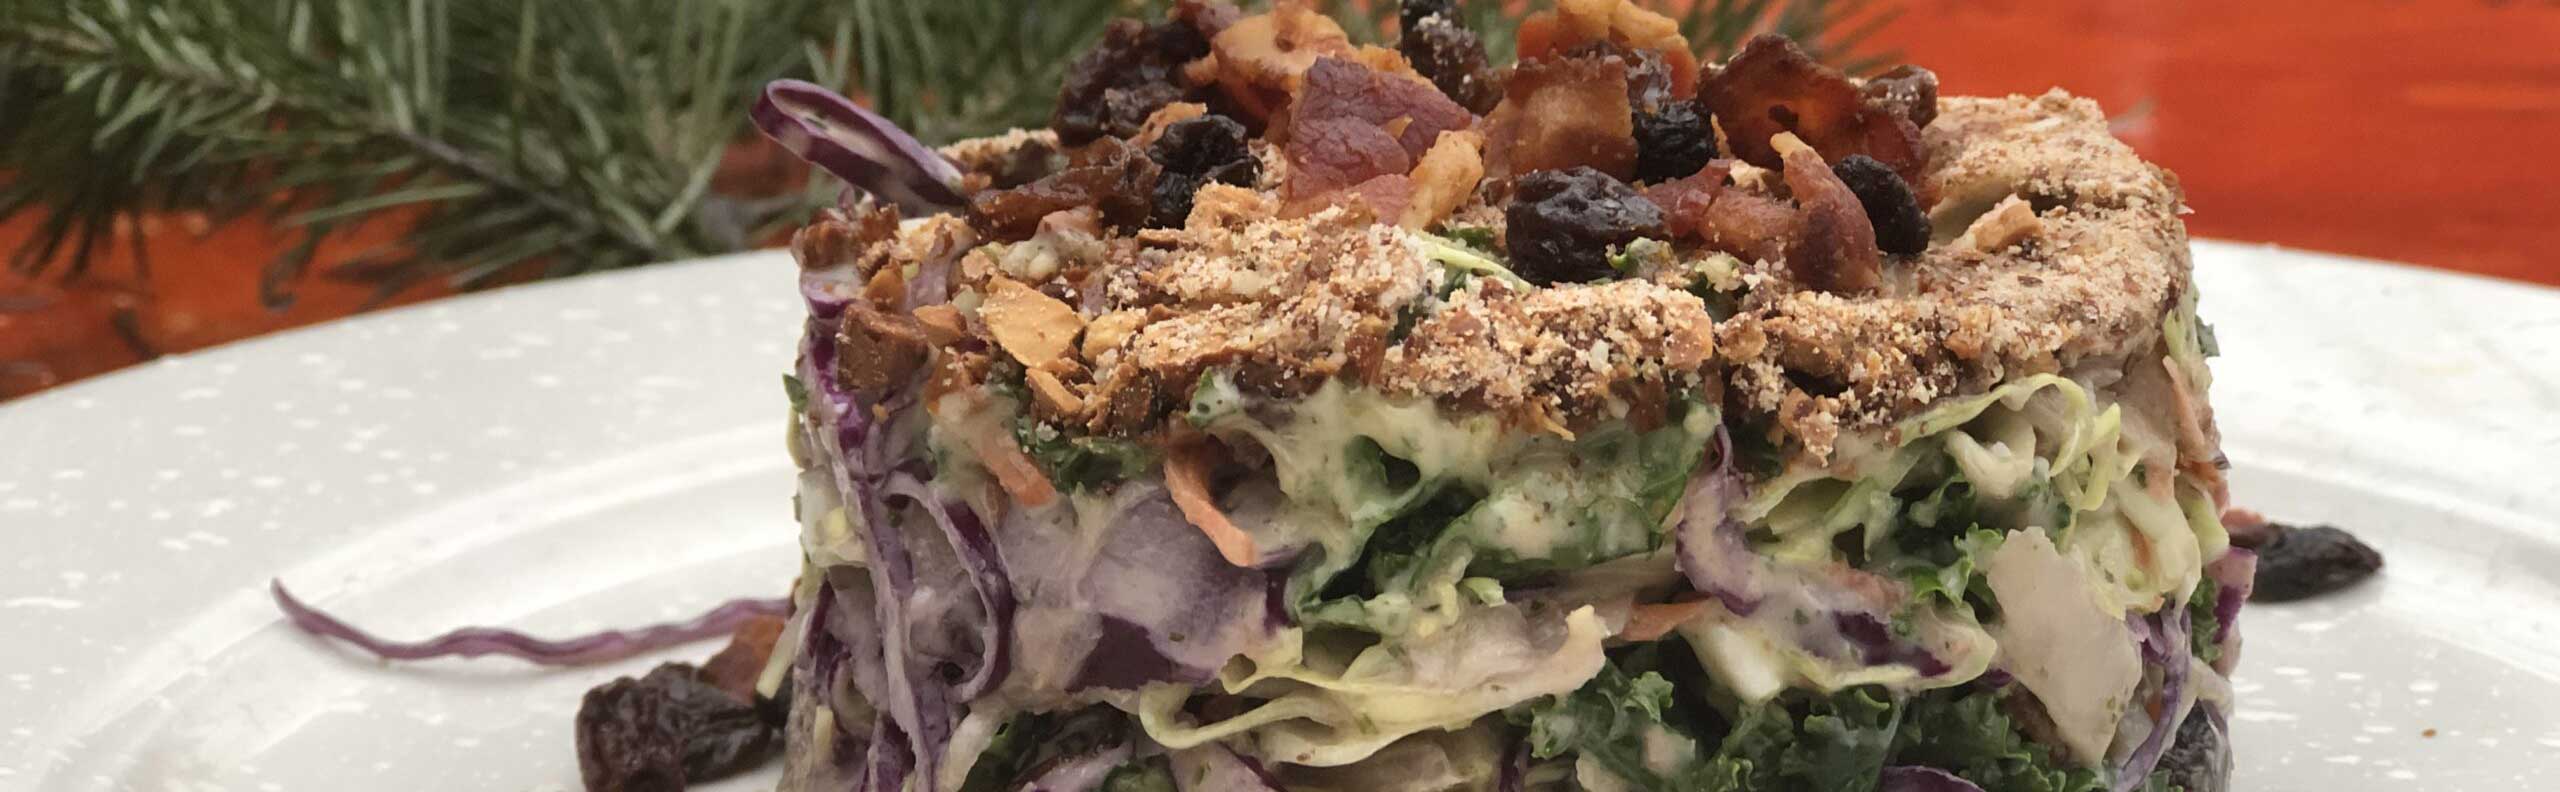 A close up of some food on top of a salad